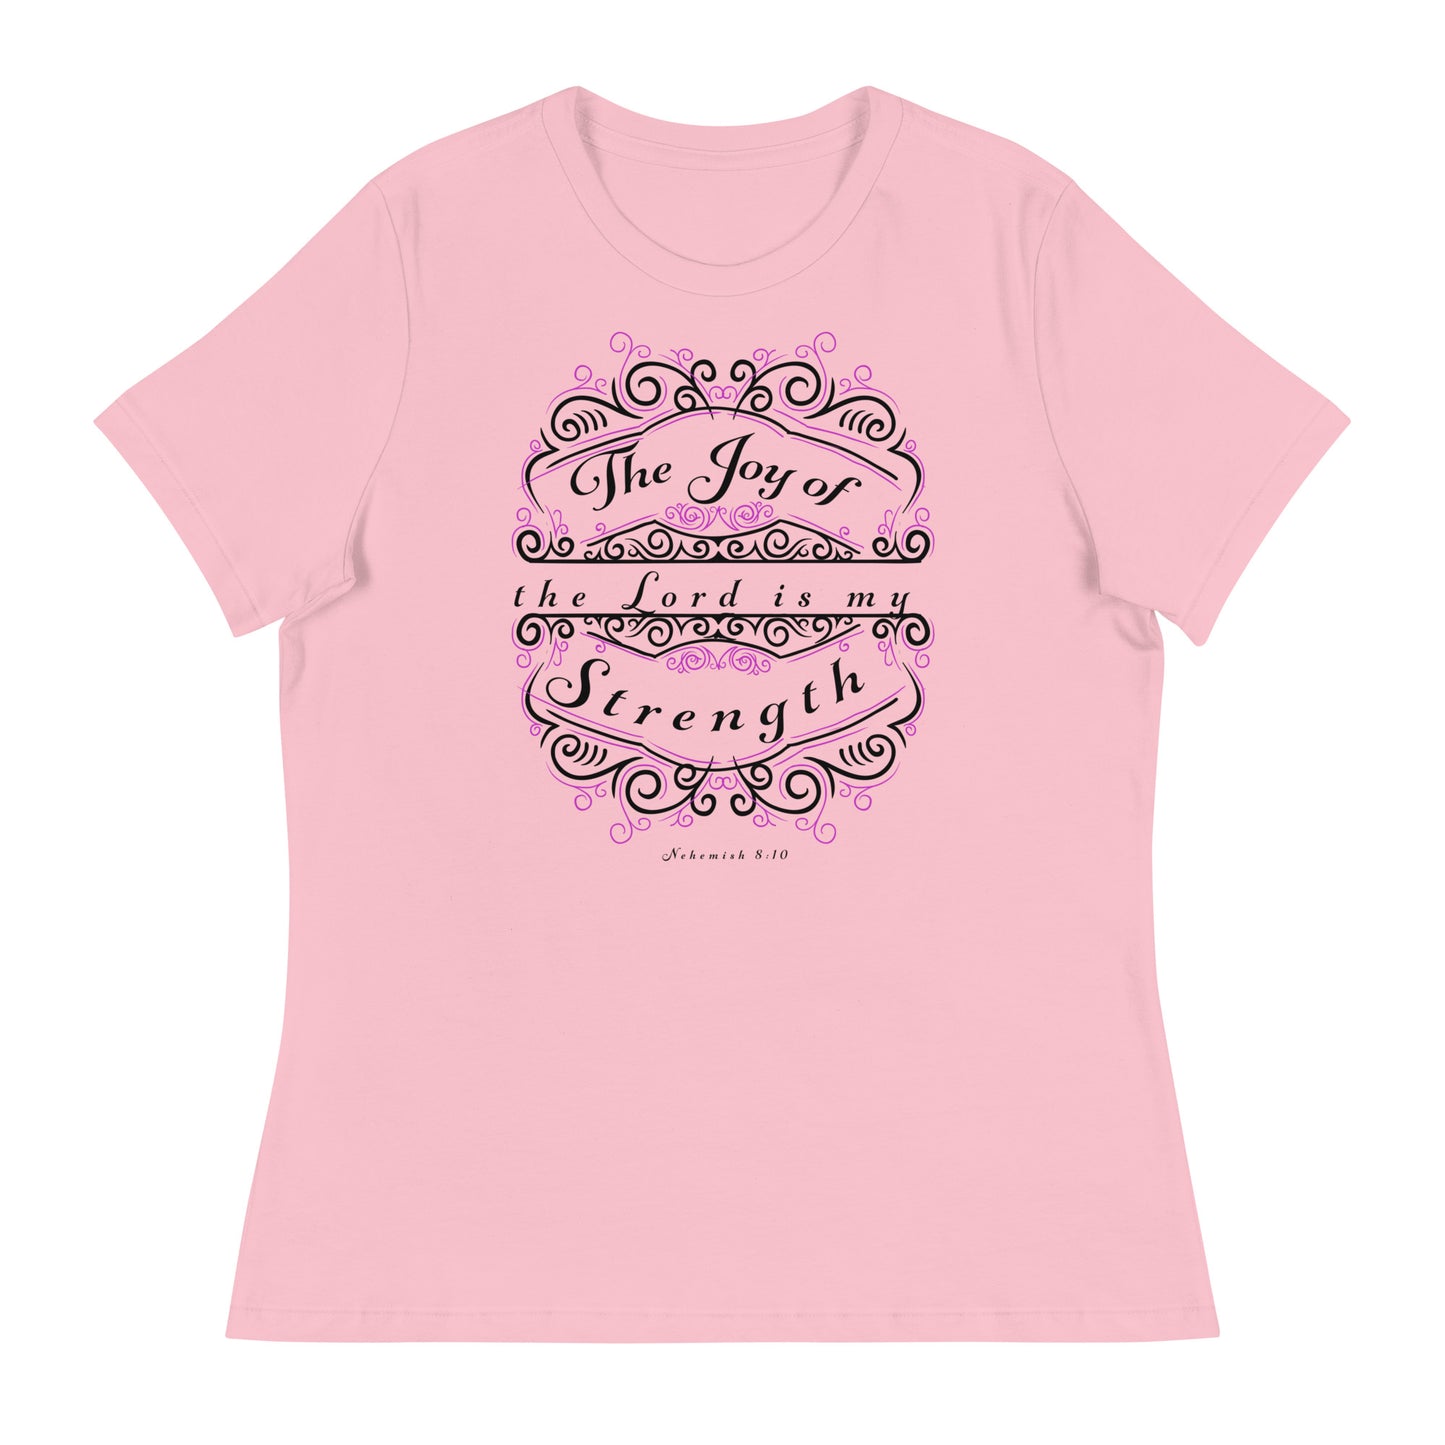 Nehemiah 8:10 relaxed womens t-shirt pink front